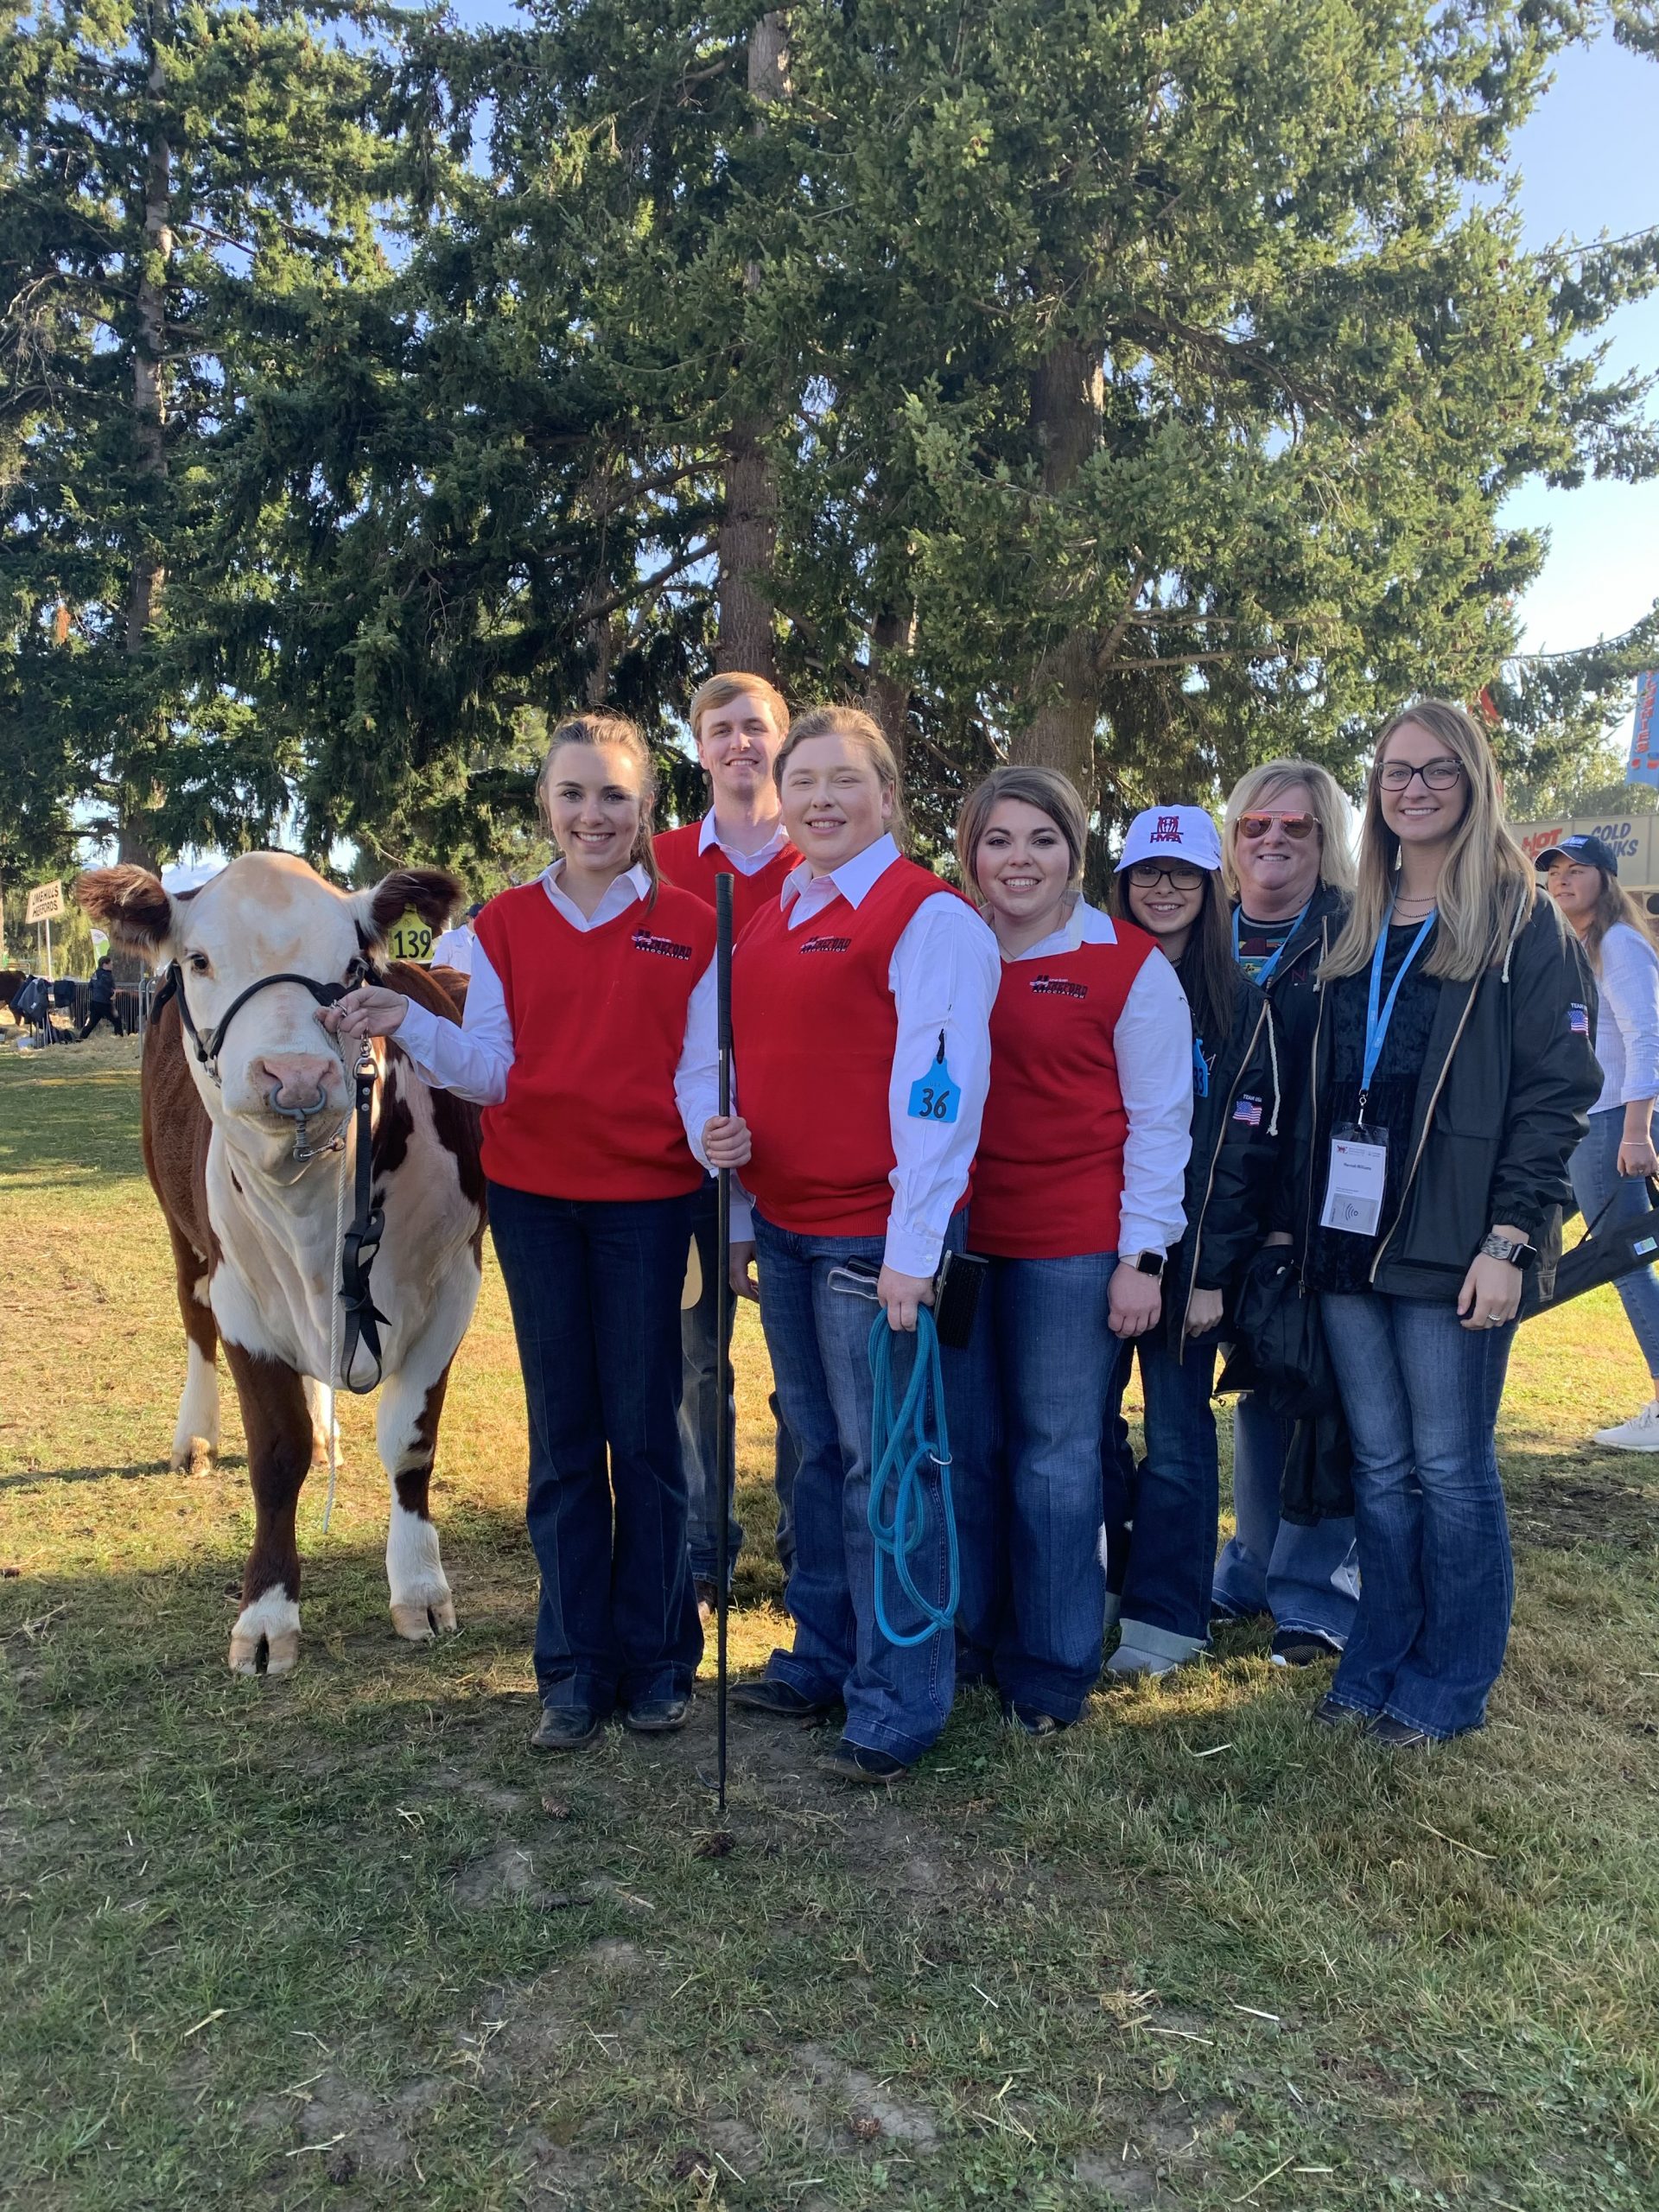 TEAM USA TAKES THIRD PLACE IN YOUNG BREEDERS COMPETITION